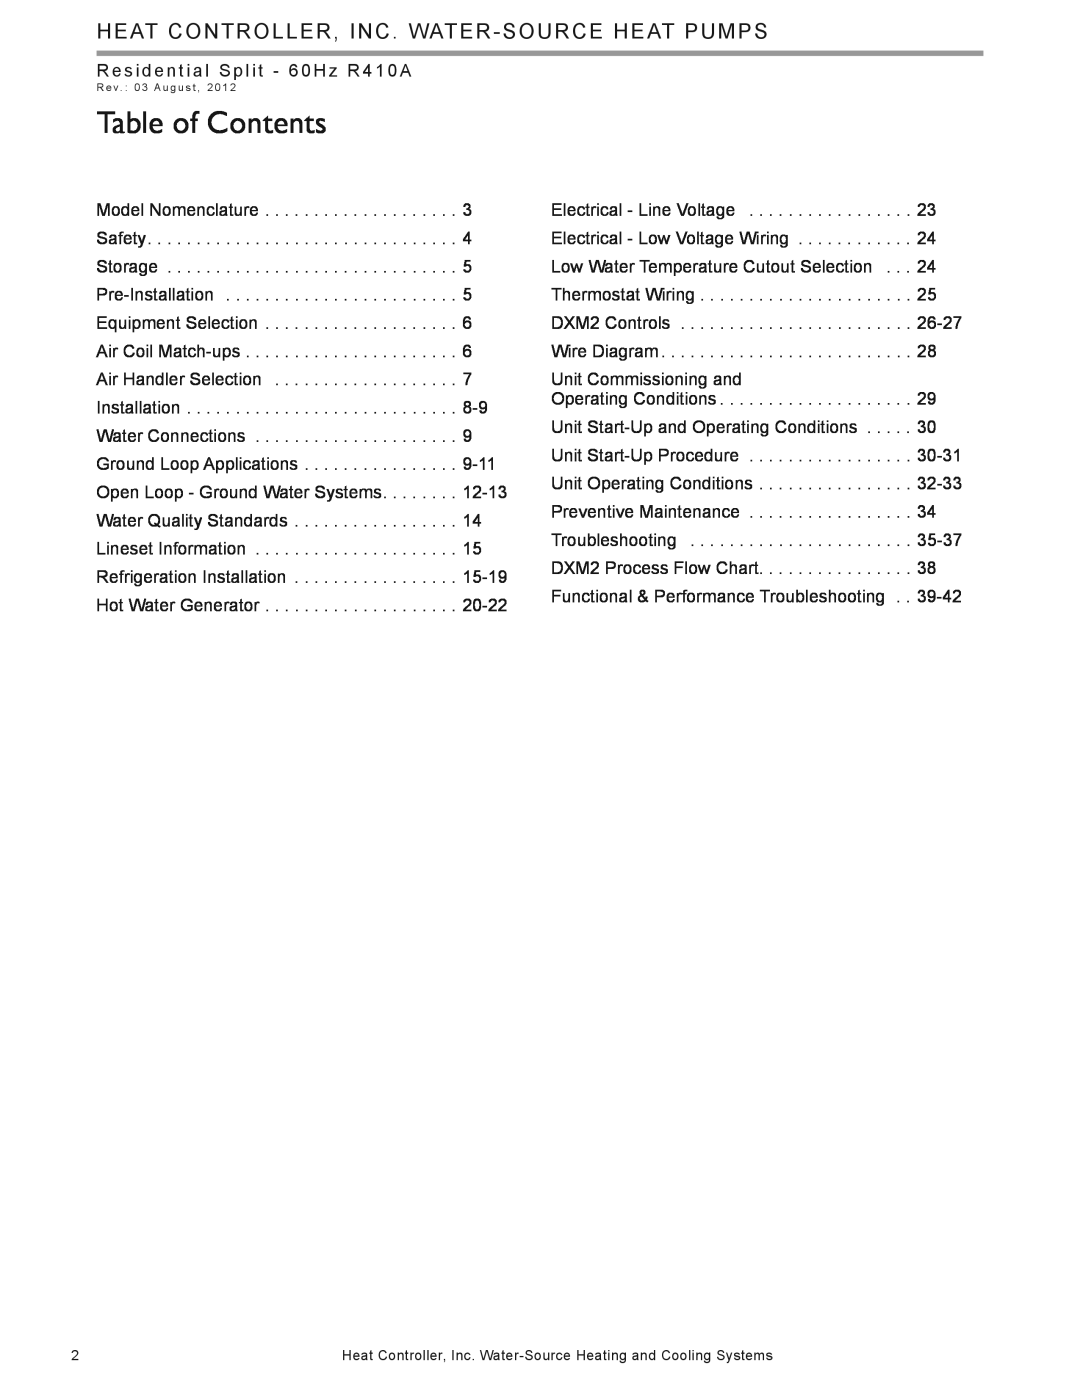 Heat Controller HTS SERIES Table of Contents, Heat Controller, Inc. Water-Sourceheat Pumps, Electrical - Line Voltage 